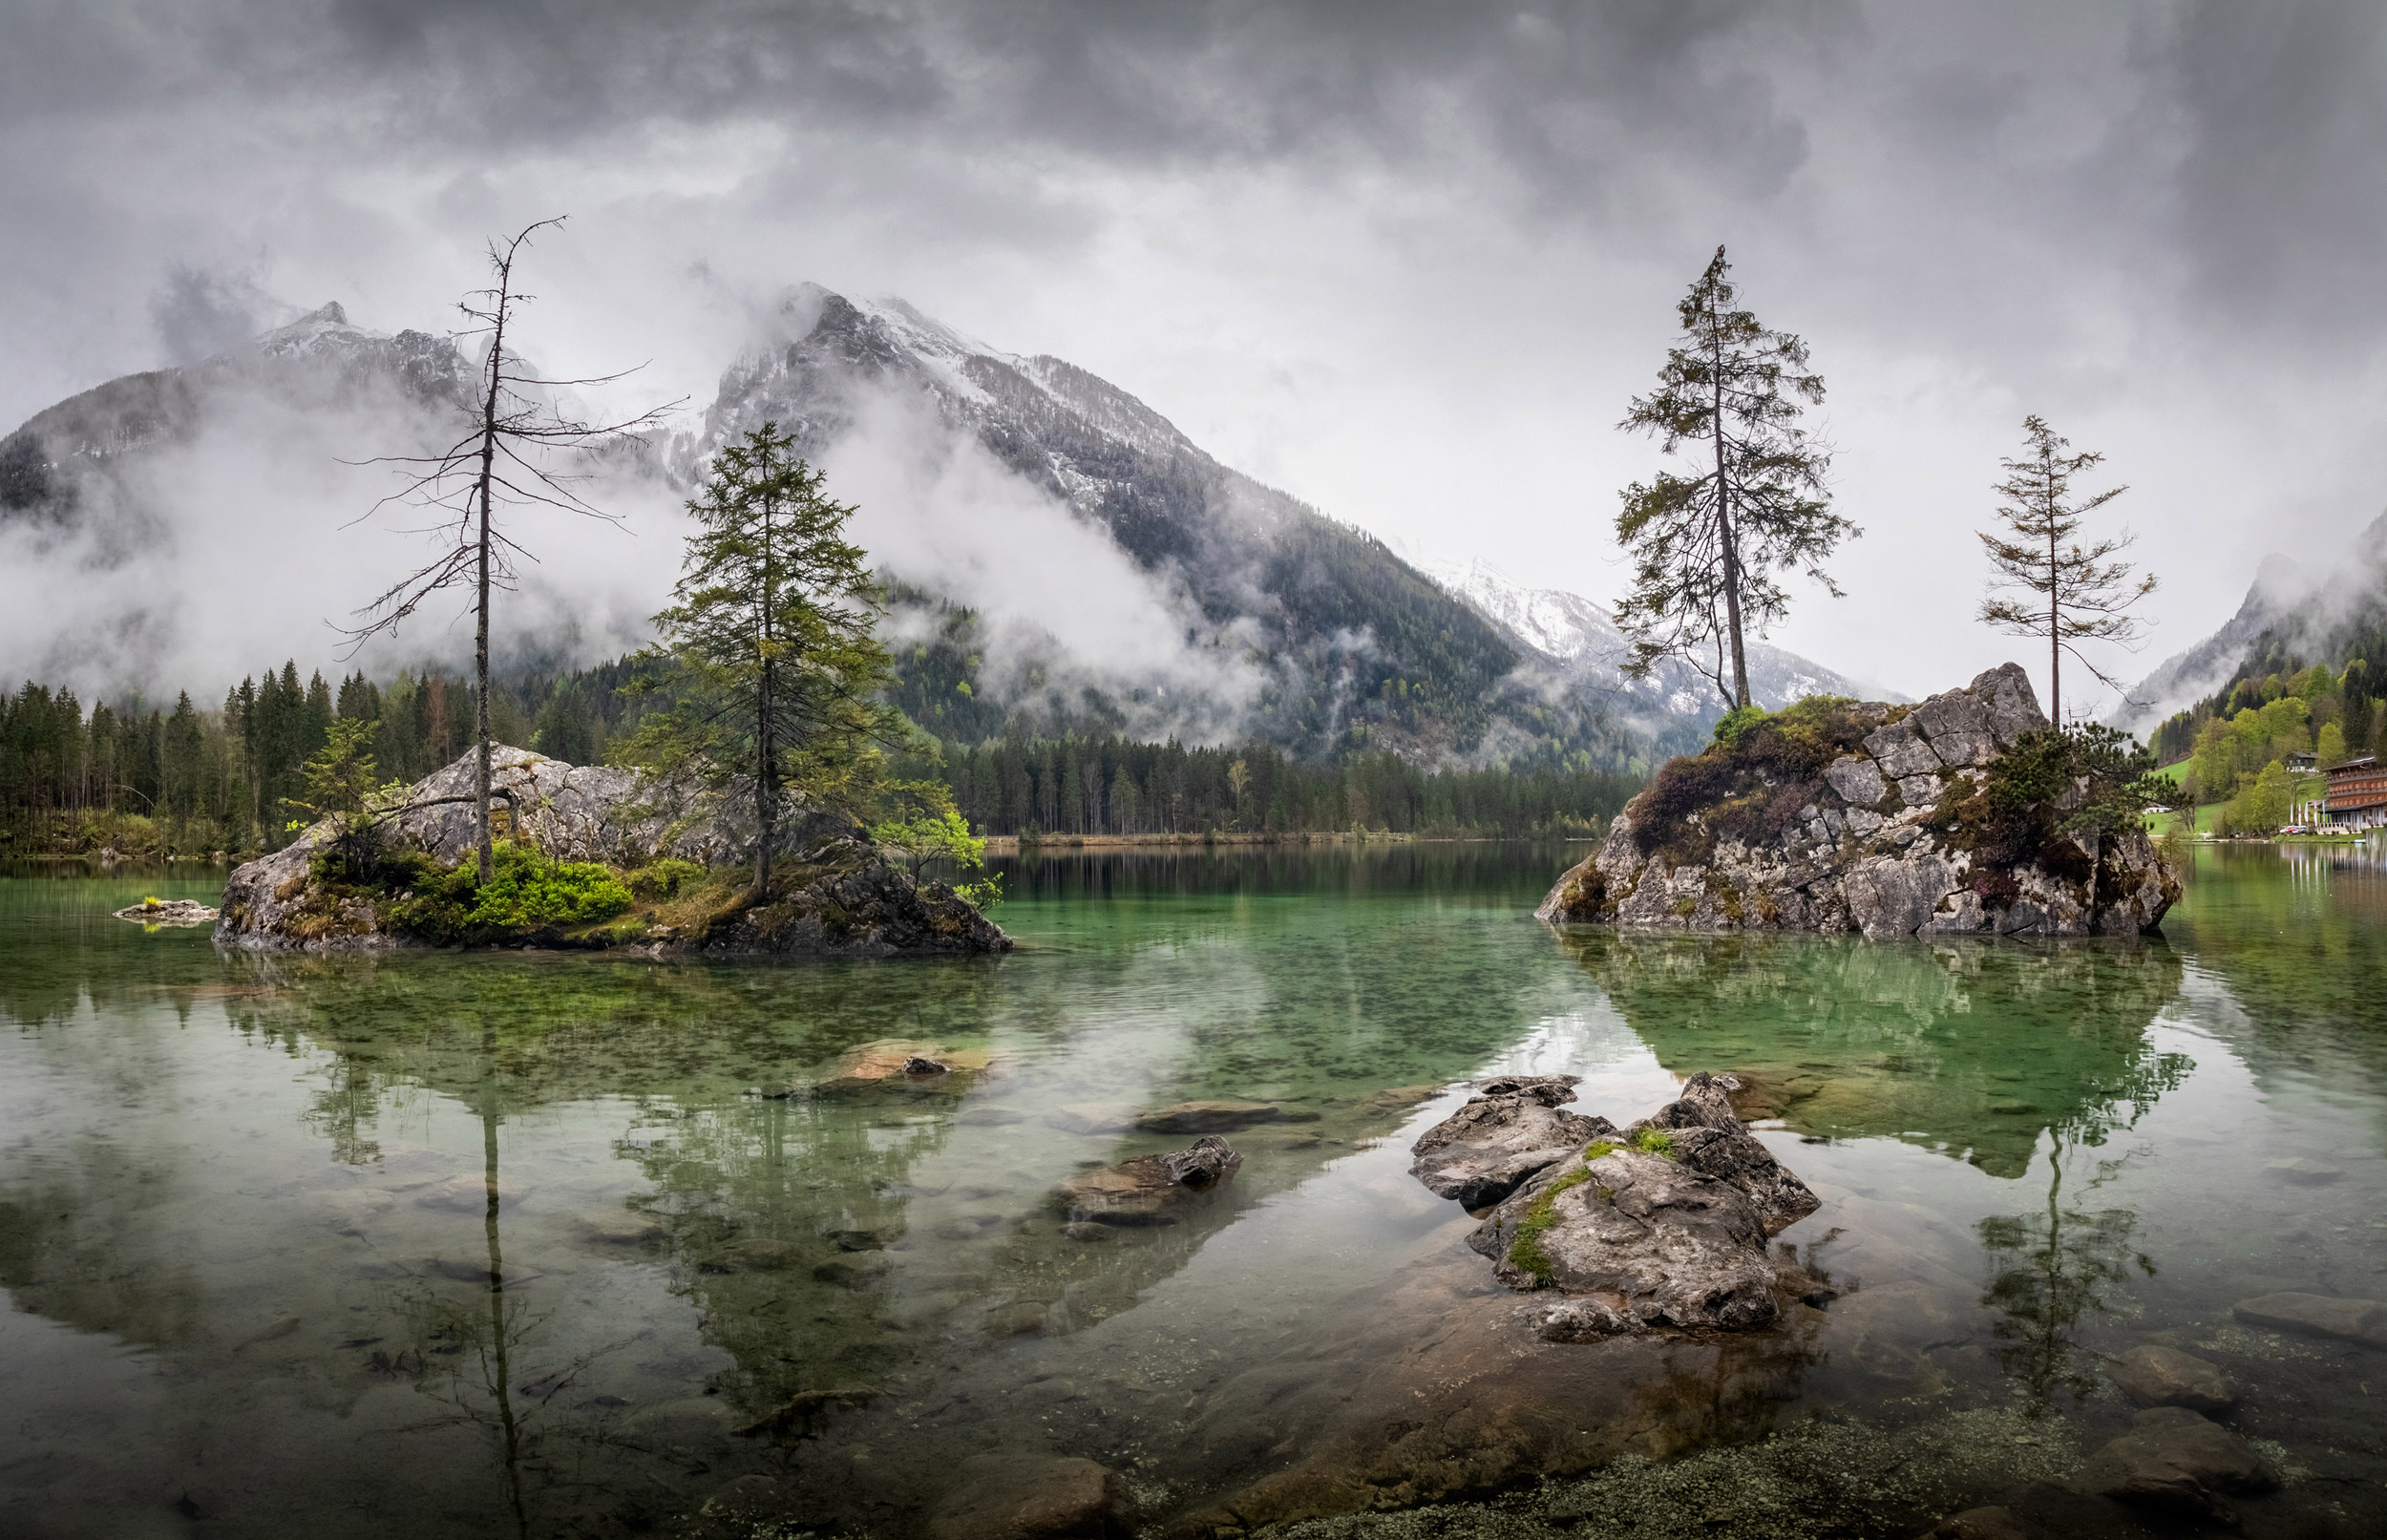 Misty summer morning on the Hintersee lake in German Alps